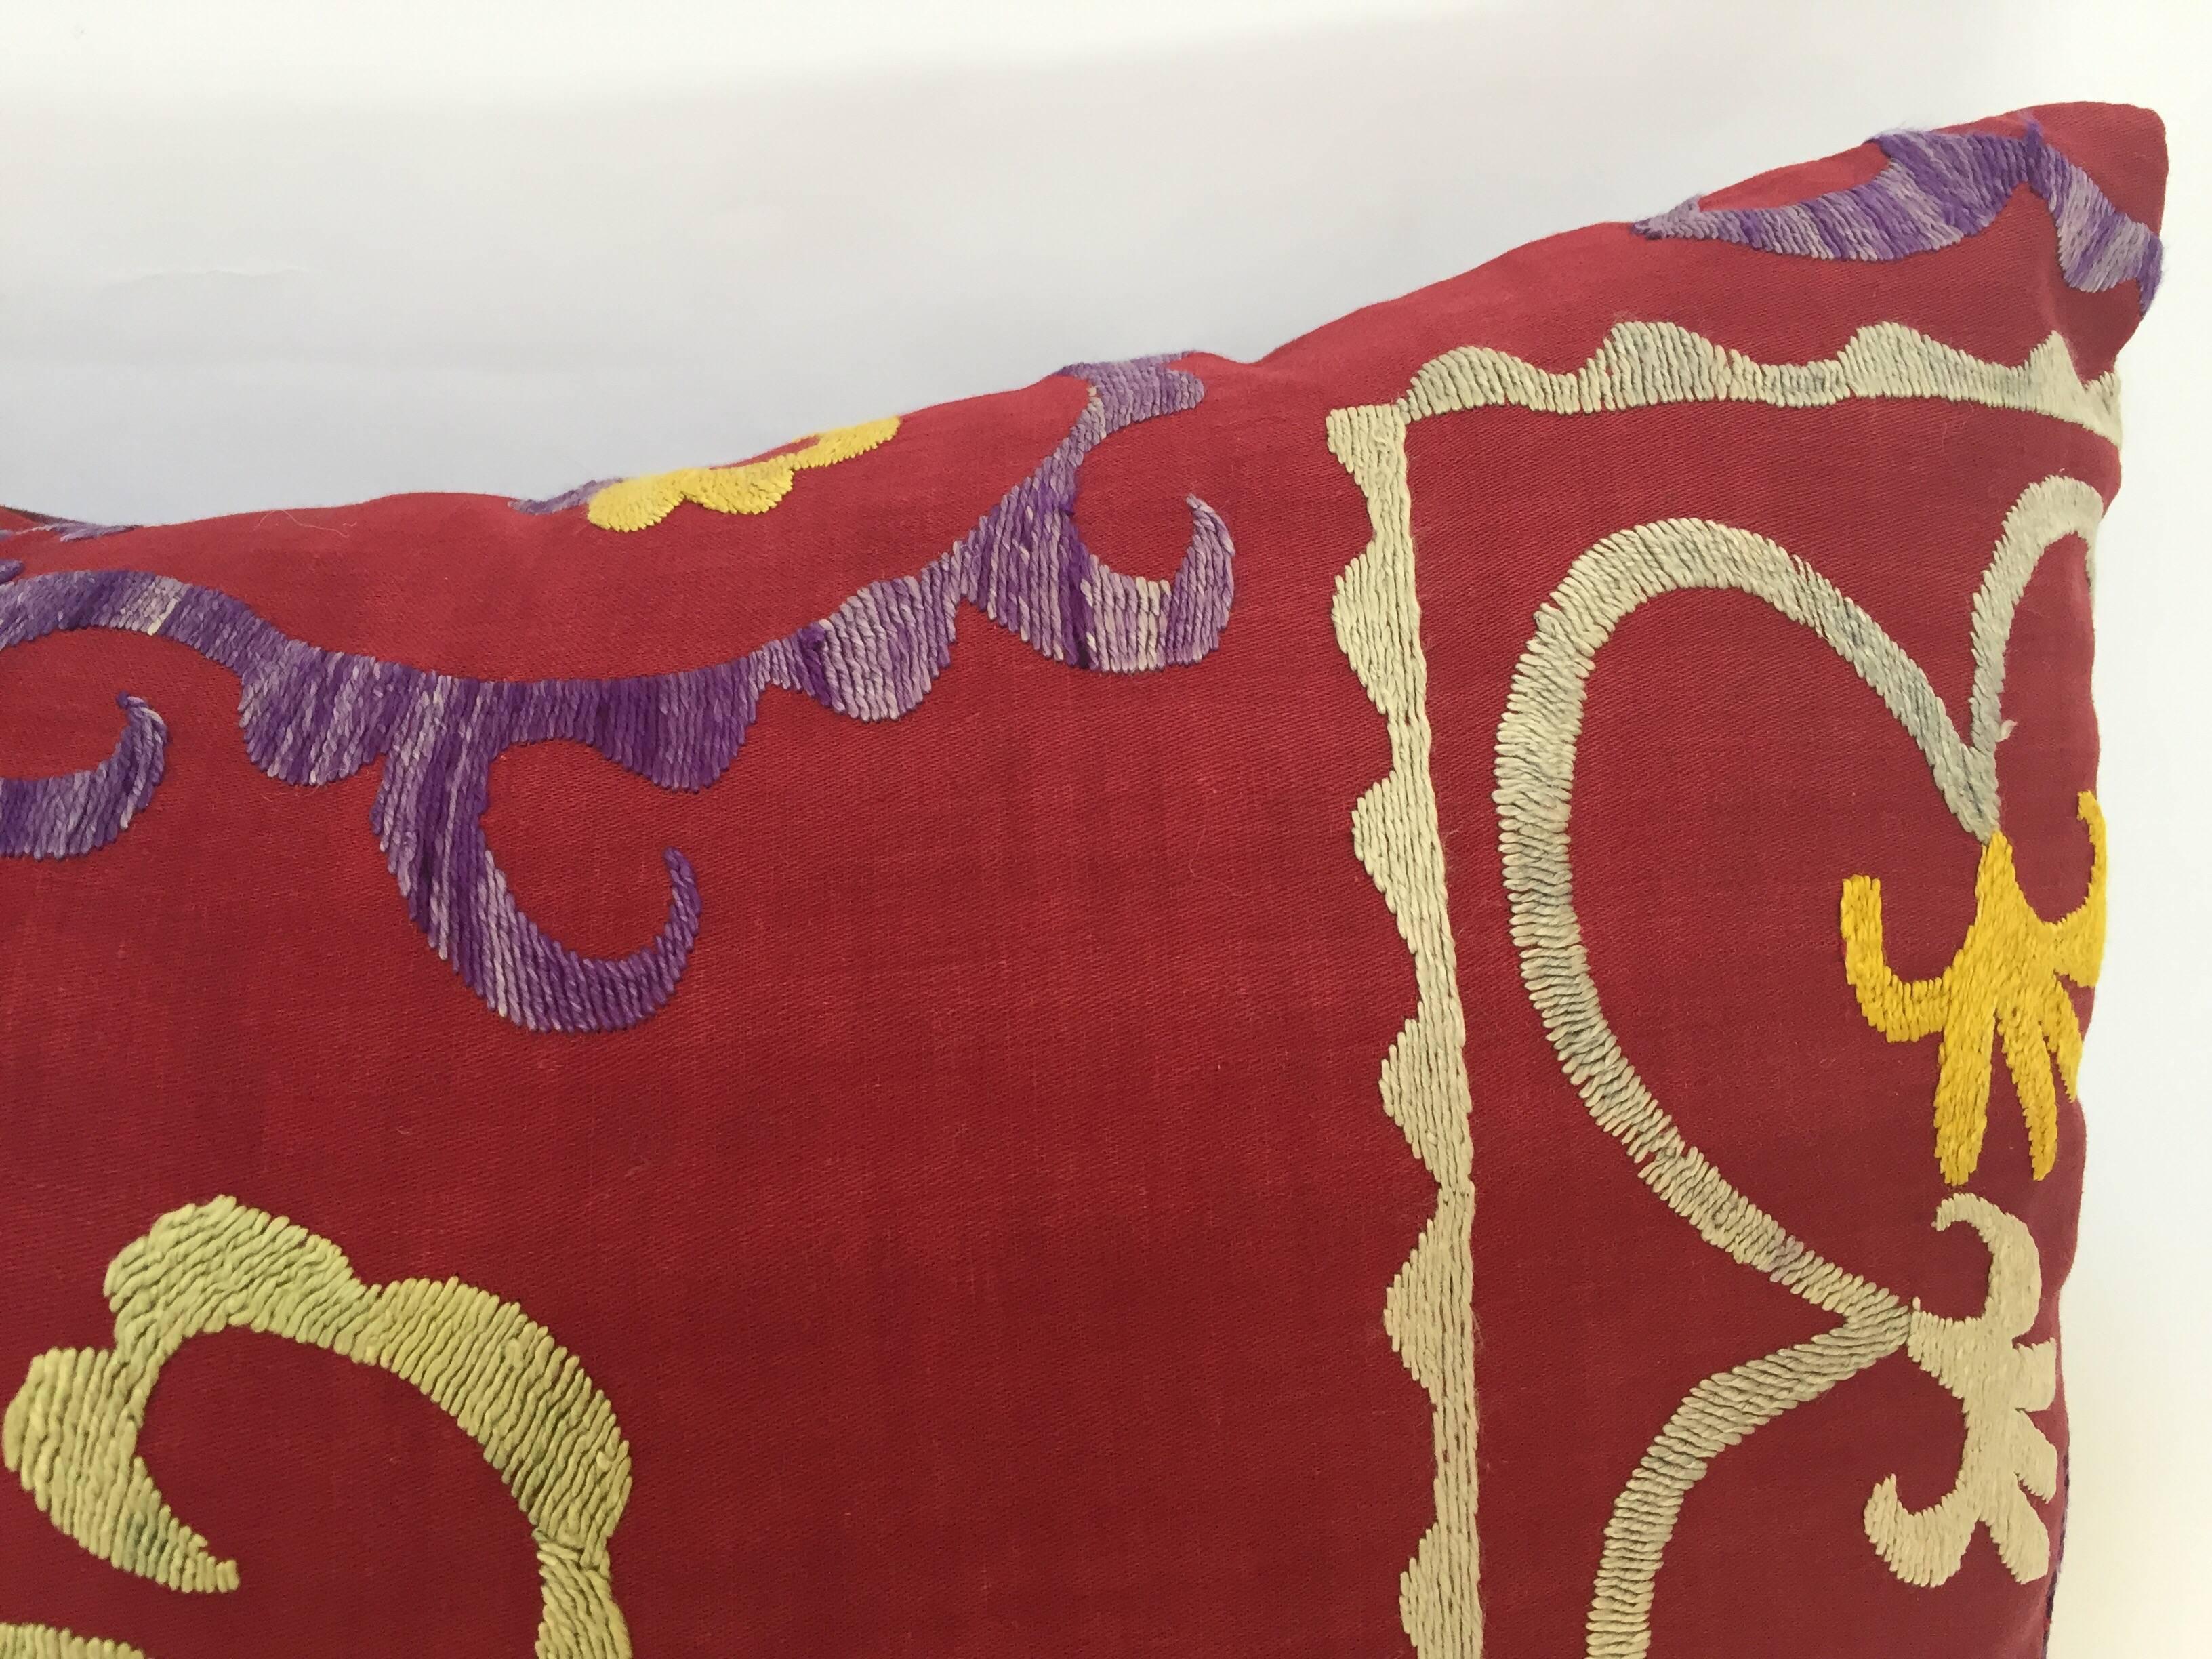 Hand-Crafted Large Vintage Colorful Suzani Embroidery Lumbar Pillow from Uzbekistan